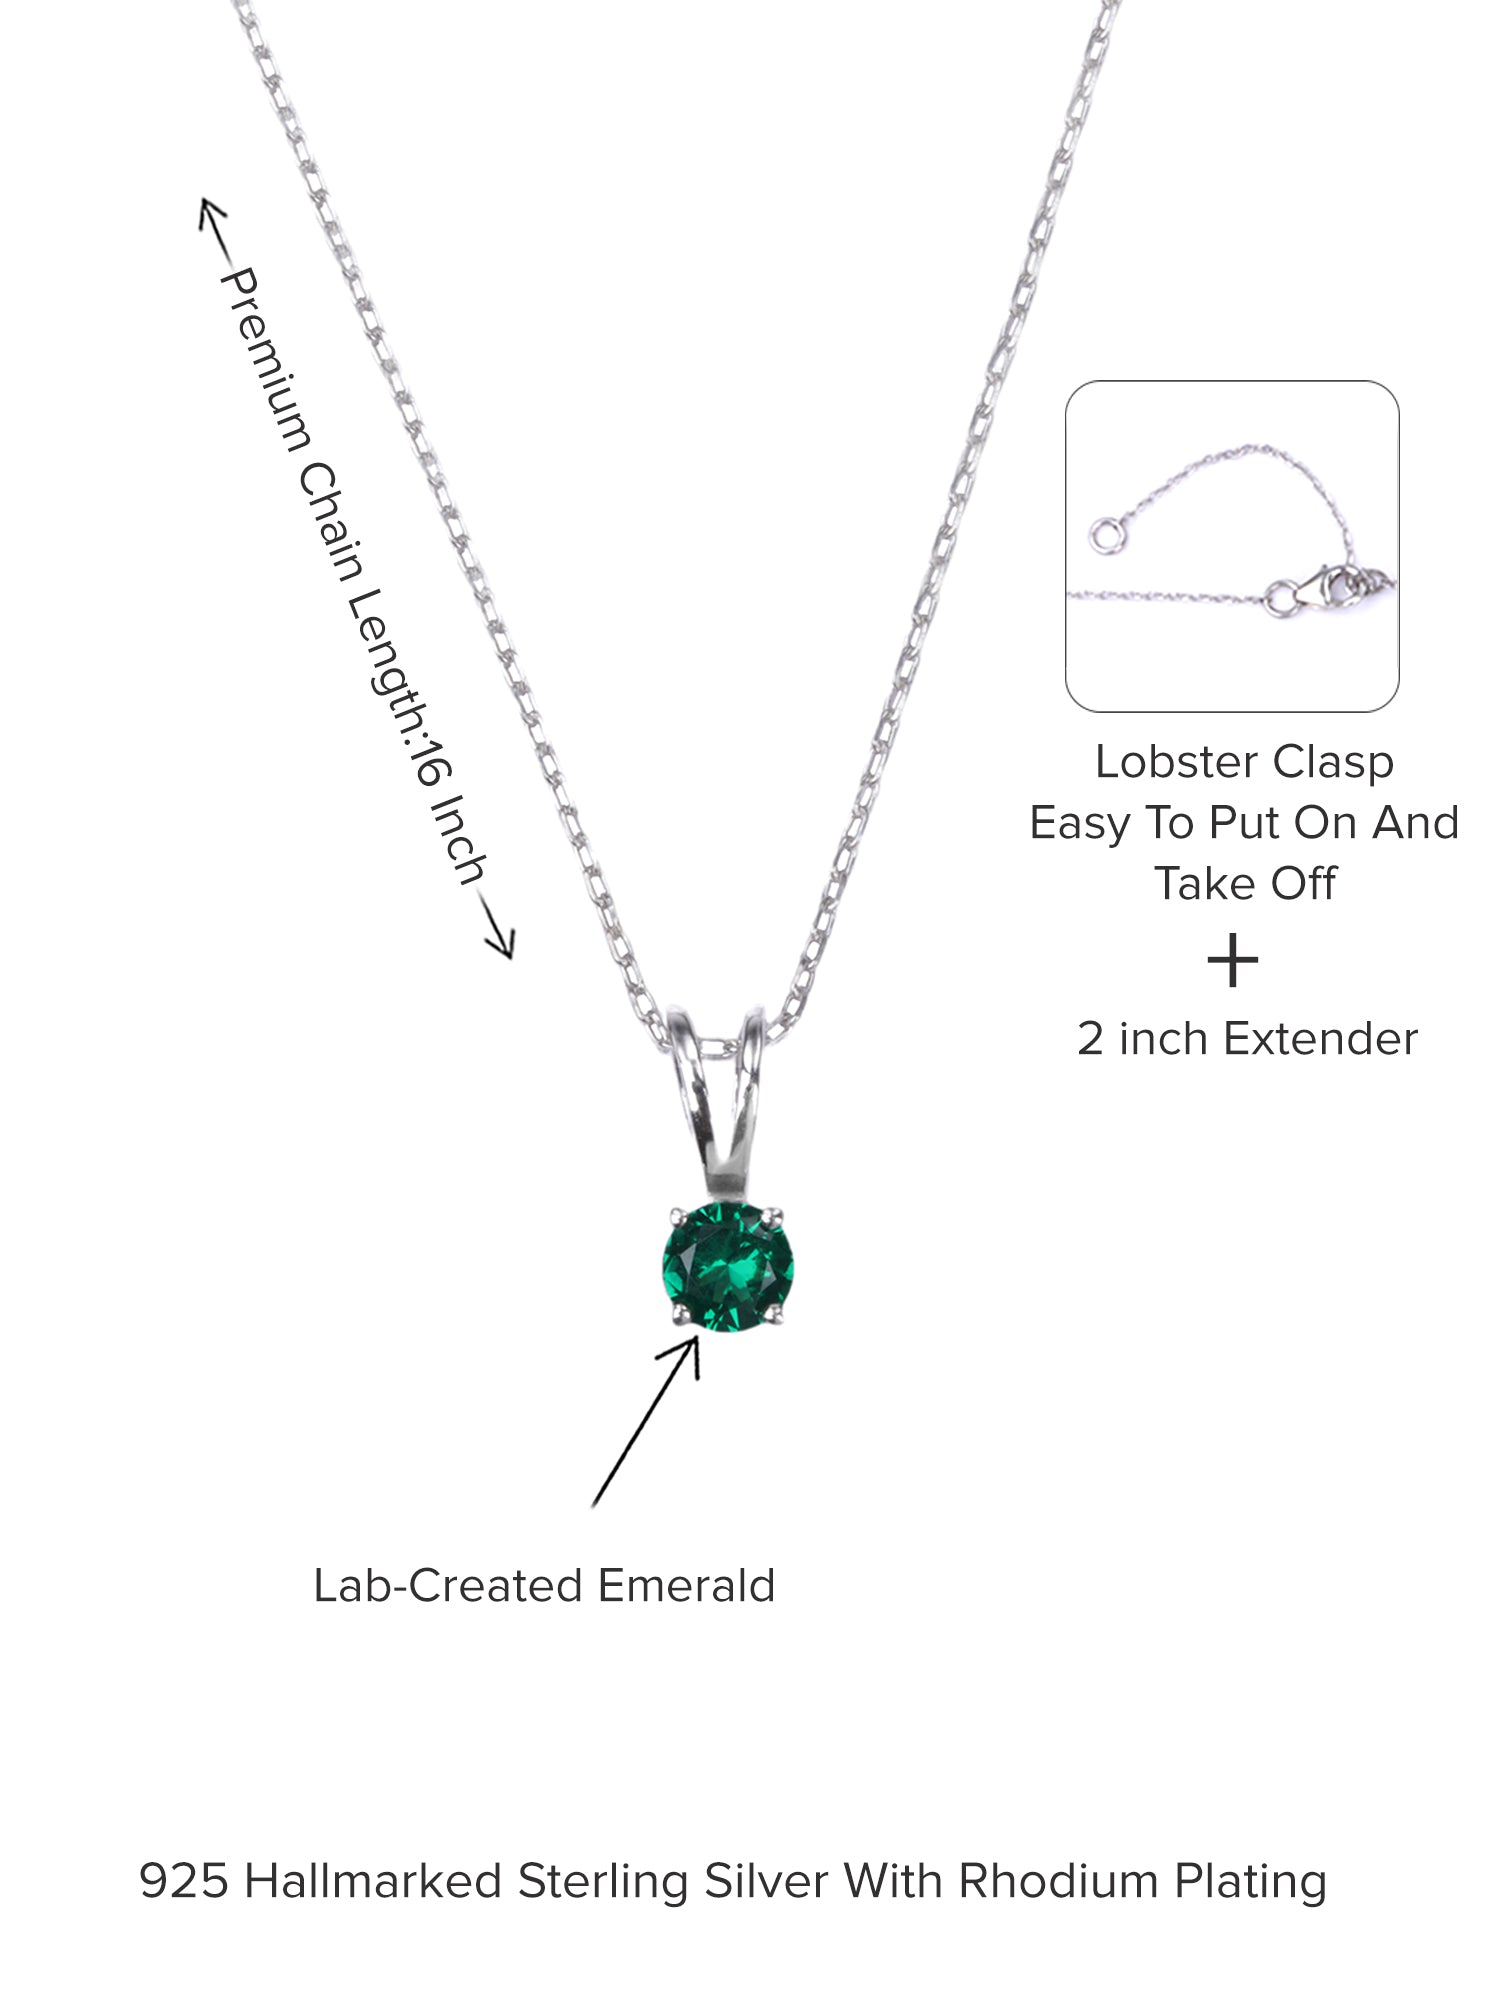 EMERALD PENDANT NECKLACE IN 925 STERLING SILVER FOR WOMEN-6